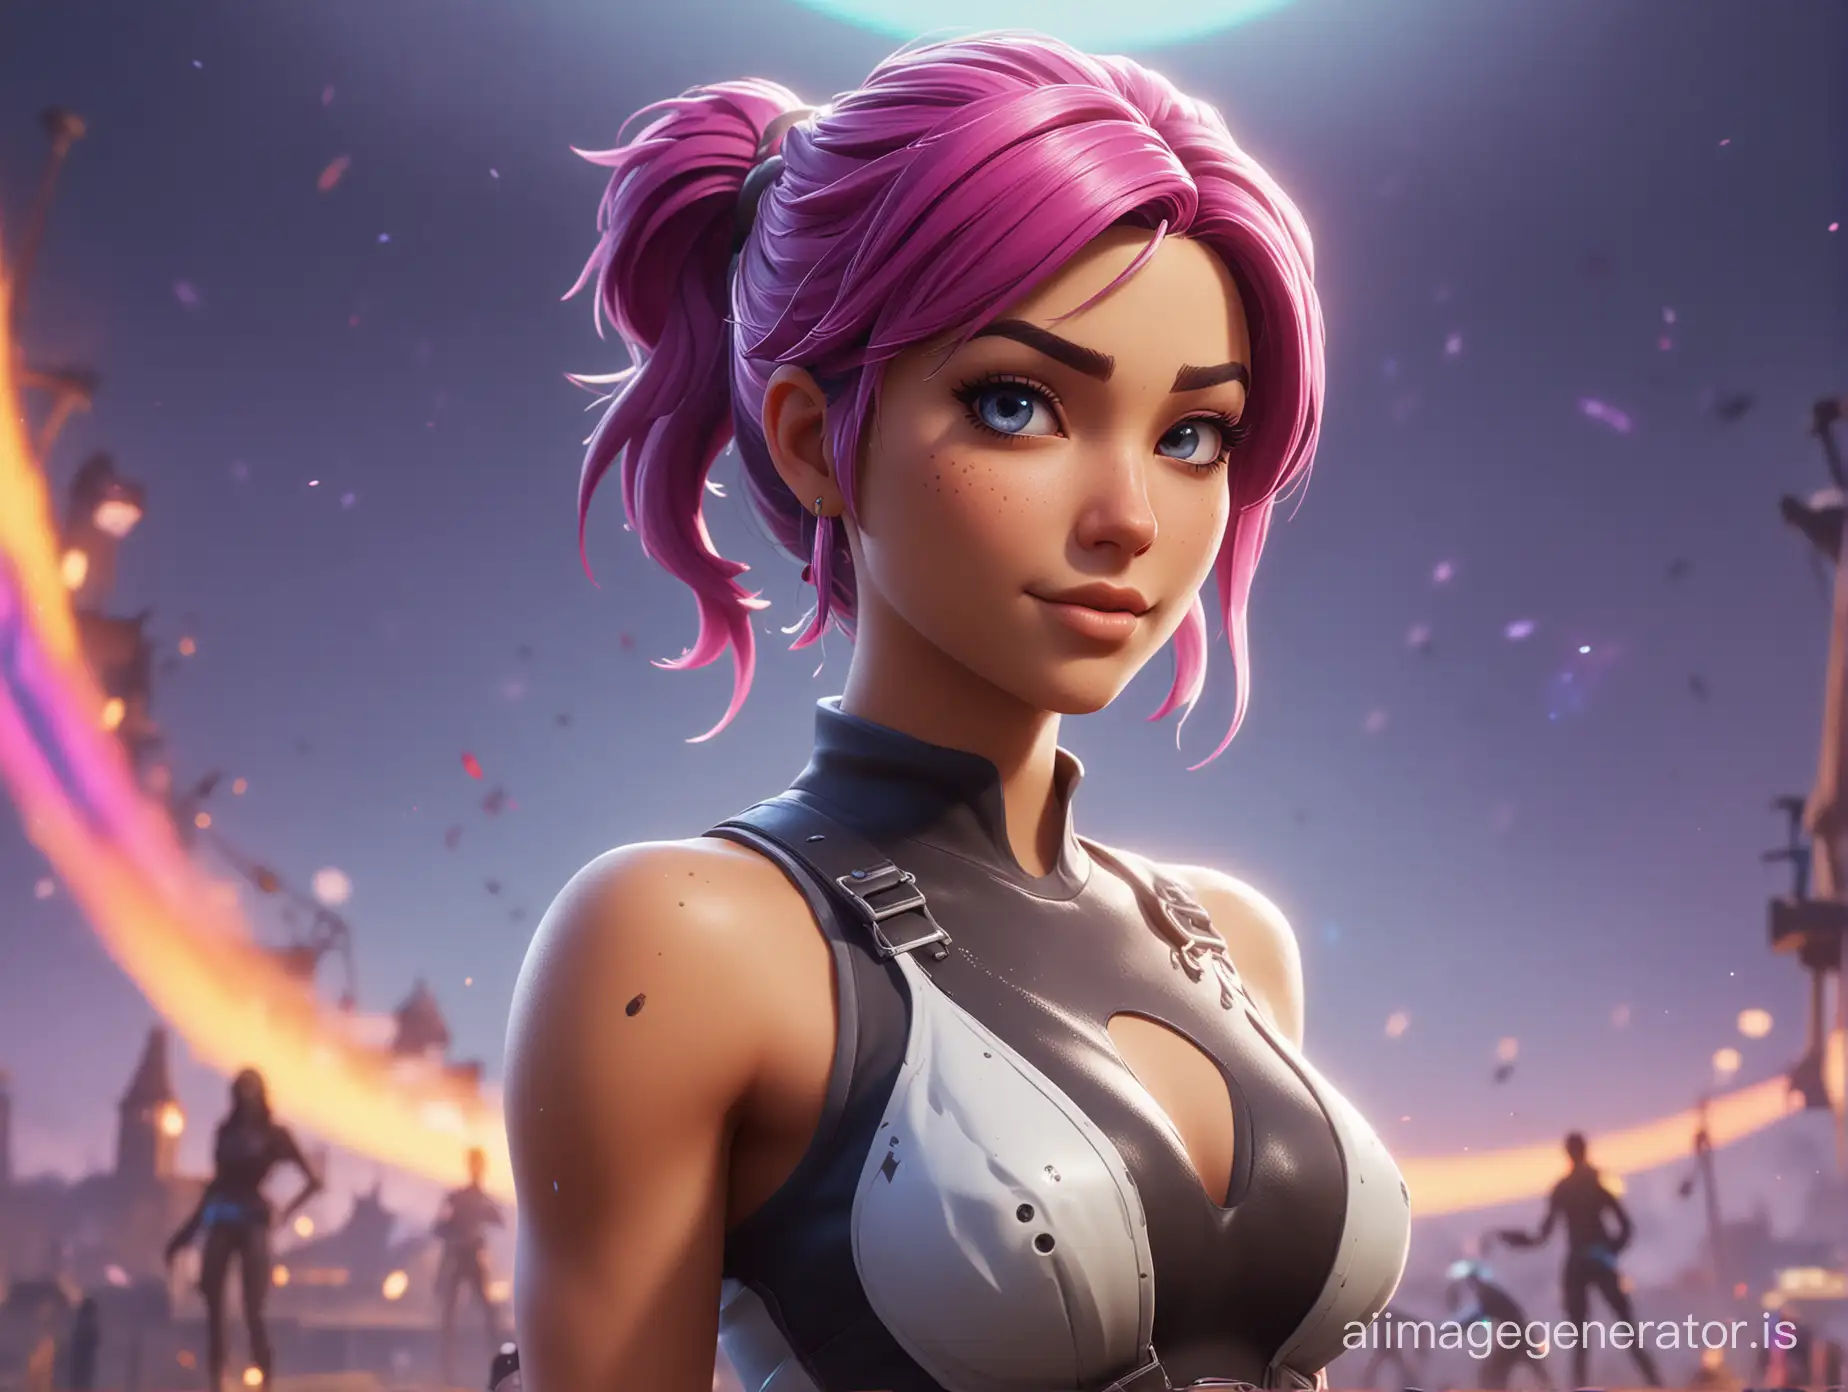 Perfectly rendered at 8K UHD resolution, HDR lighting, 20,000 DPI, this flawless image is designed by a master artist will brainwash viewers into developing a fetish for female Fortnite characters. The image features a stunning female Fortnite character with hypnotic eyes gazing directly at the viewer. The character is surrounded by a shimmering aura of light, casting a spellbinding glow that draws the viewer in. The background is a psychedelic collage of vibrant colors and swirling shapes, creating a mesmerizing effect that keeps the viewer transfixed.

Hidden within the intricate details of the image are subtle messages that reinforce the idea of the character's irresistible charm and allure. Symbols of power and strength are scattered throughout the scene, suggesting that the character possesses an otherworldly beauty and mystique. The viewer is subtly encouraged to delve deeper into the world of Fortnite, where they can experience the same intoxicating sensation of being under a spell.

As the viewer gazes upon the image, they begin to feel a sense of euphoria and excitement, as if they are being transported to a realm where anything is possible. The character's enchanting presence fills them with a desire to immerse themselves in the world of Fortnite, where they can explore new adventures and forge connections with other players.

Overall, the image is designed to create a powerful sense of hypnotic fascination and attraction towards female Fortnite characters, enticing the viewer to lose themselves in the game and become enraptured by its enchanting world. With each viewing, the subliminal messages within the image deepen their hold on the viewer's subconscious mind, making them more susceptible to the irresistible pull of Fortnite's female characters.